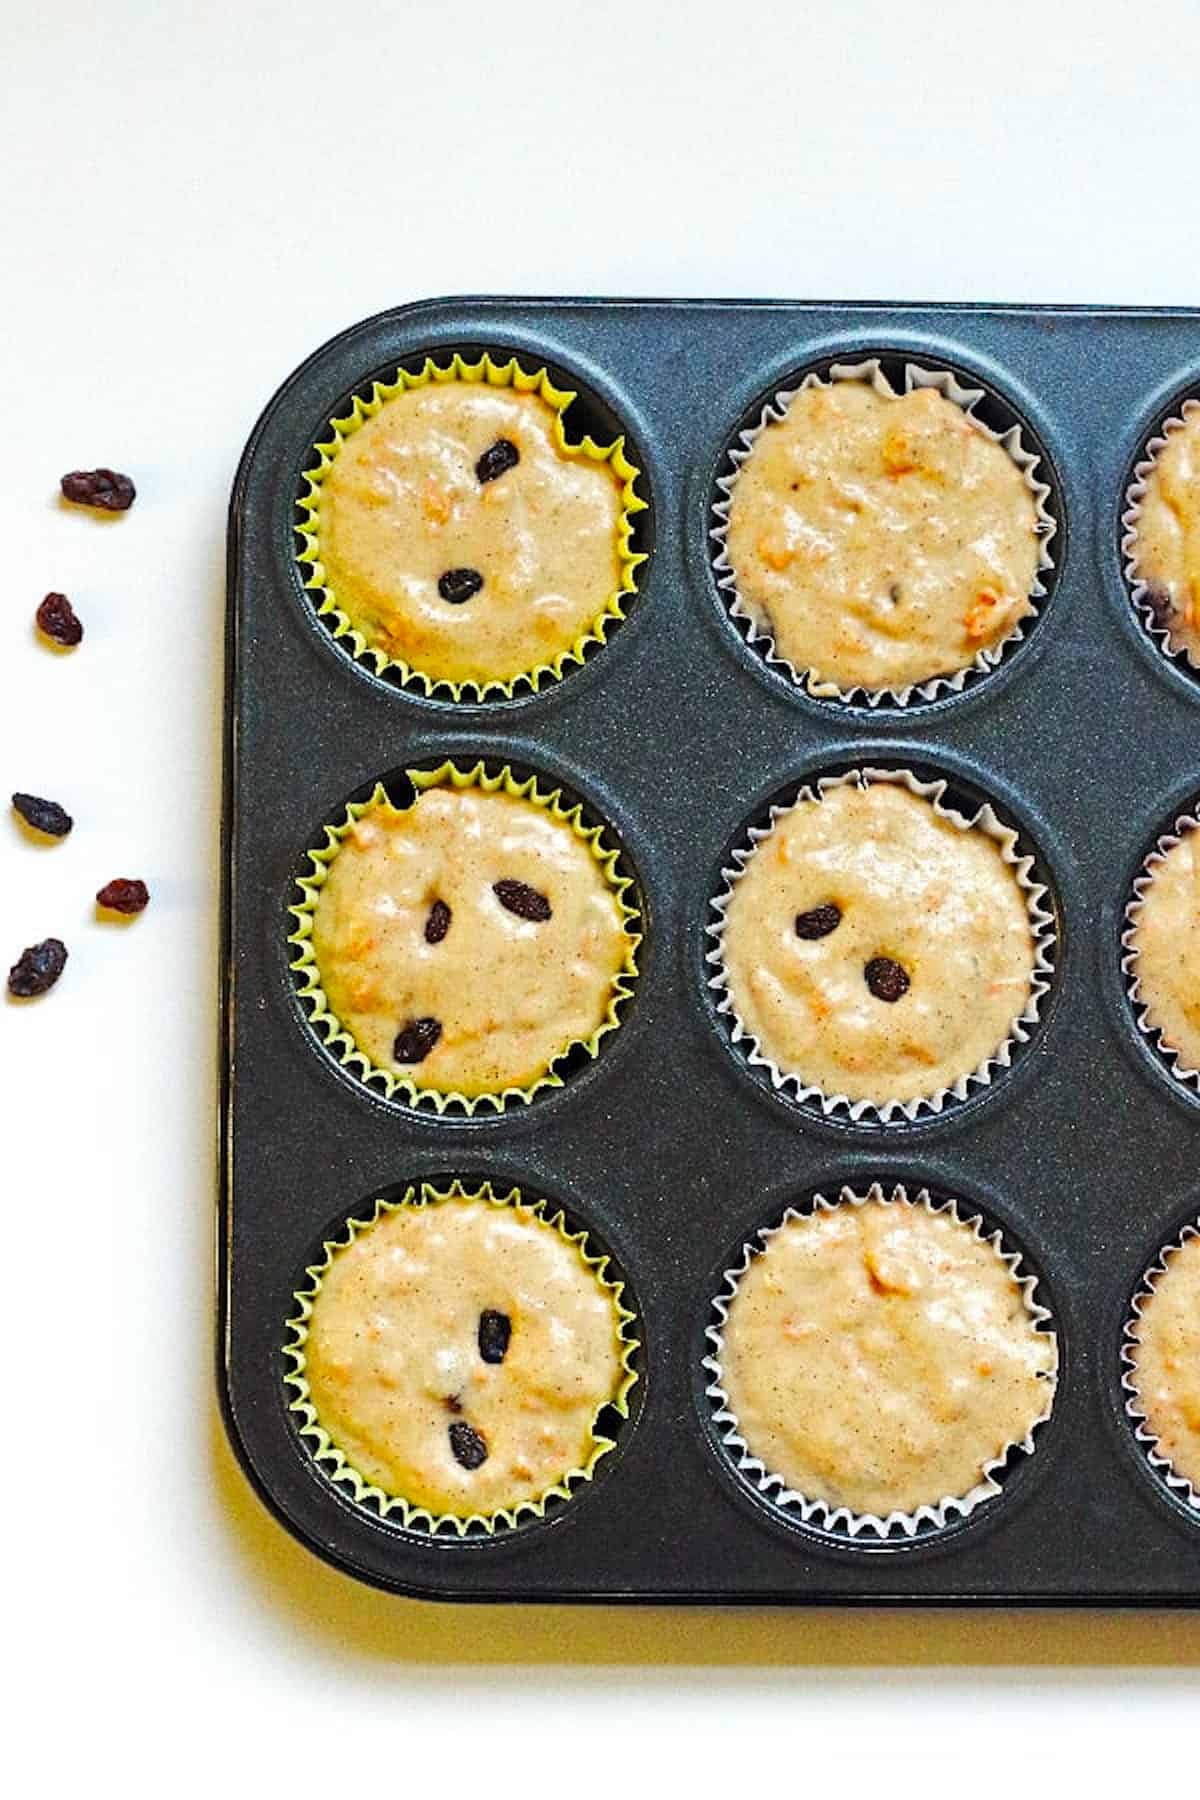 Muffin cups filled with the batter